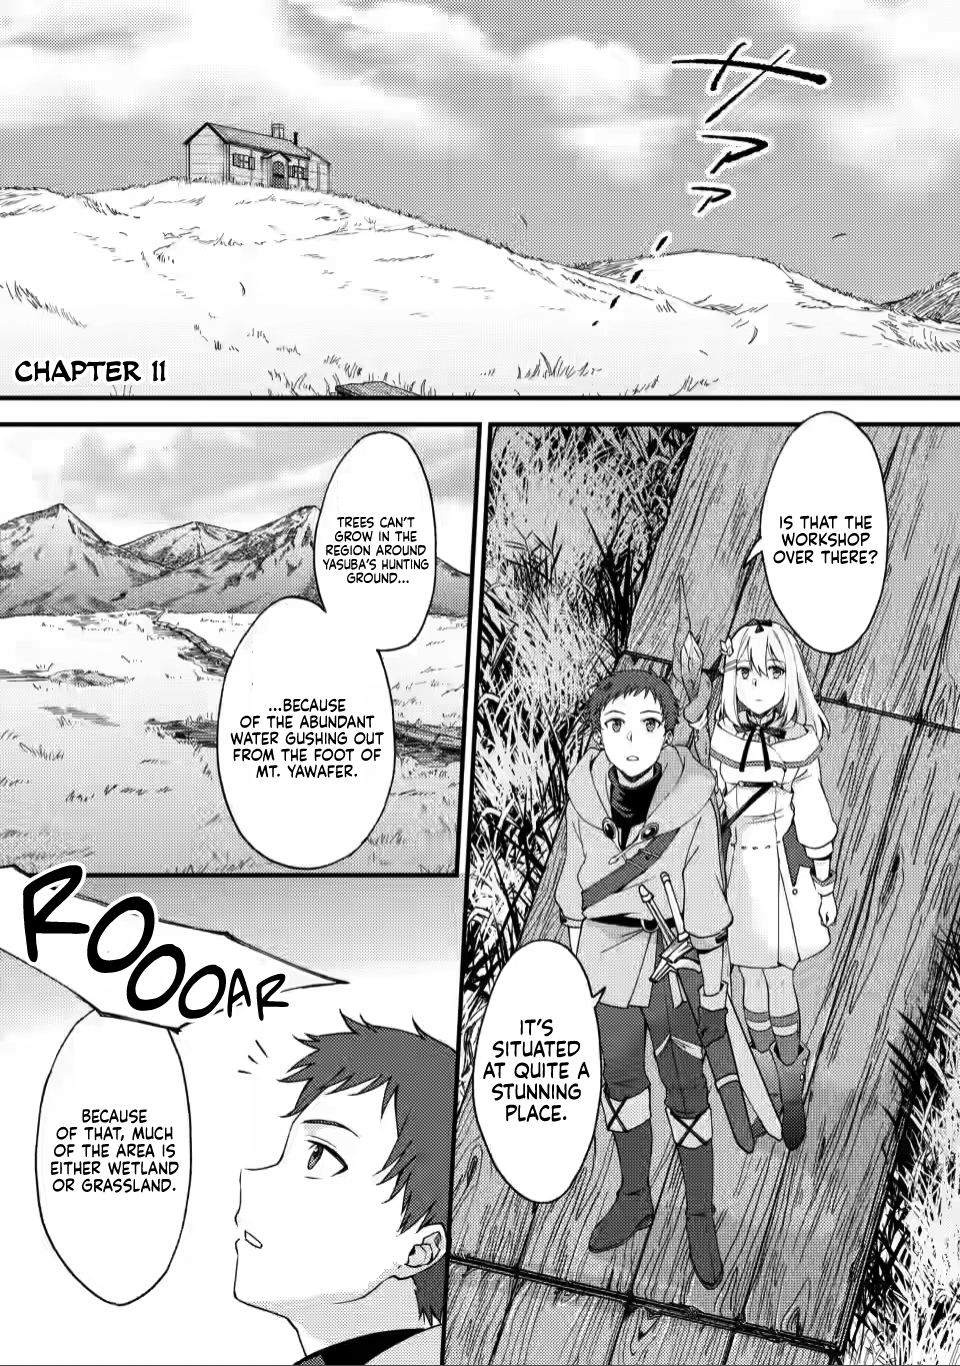 A Sword Master Childhood Friend Power Harassed Me Harshly, So I Broke Off Our Relationship And Made A Fresh Start At The Frontier As A Magic Swordsman - Page 1